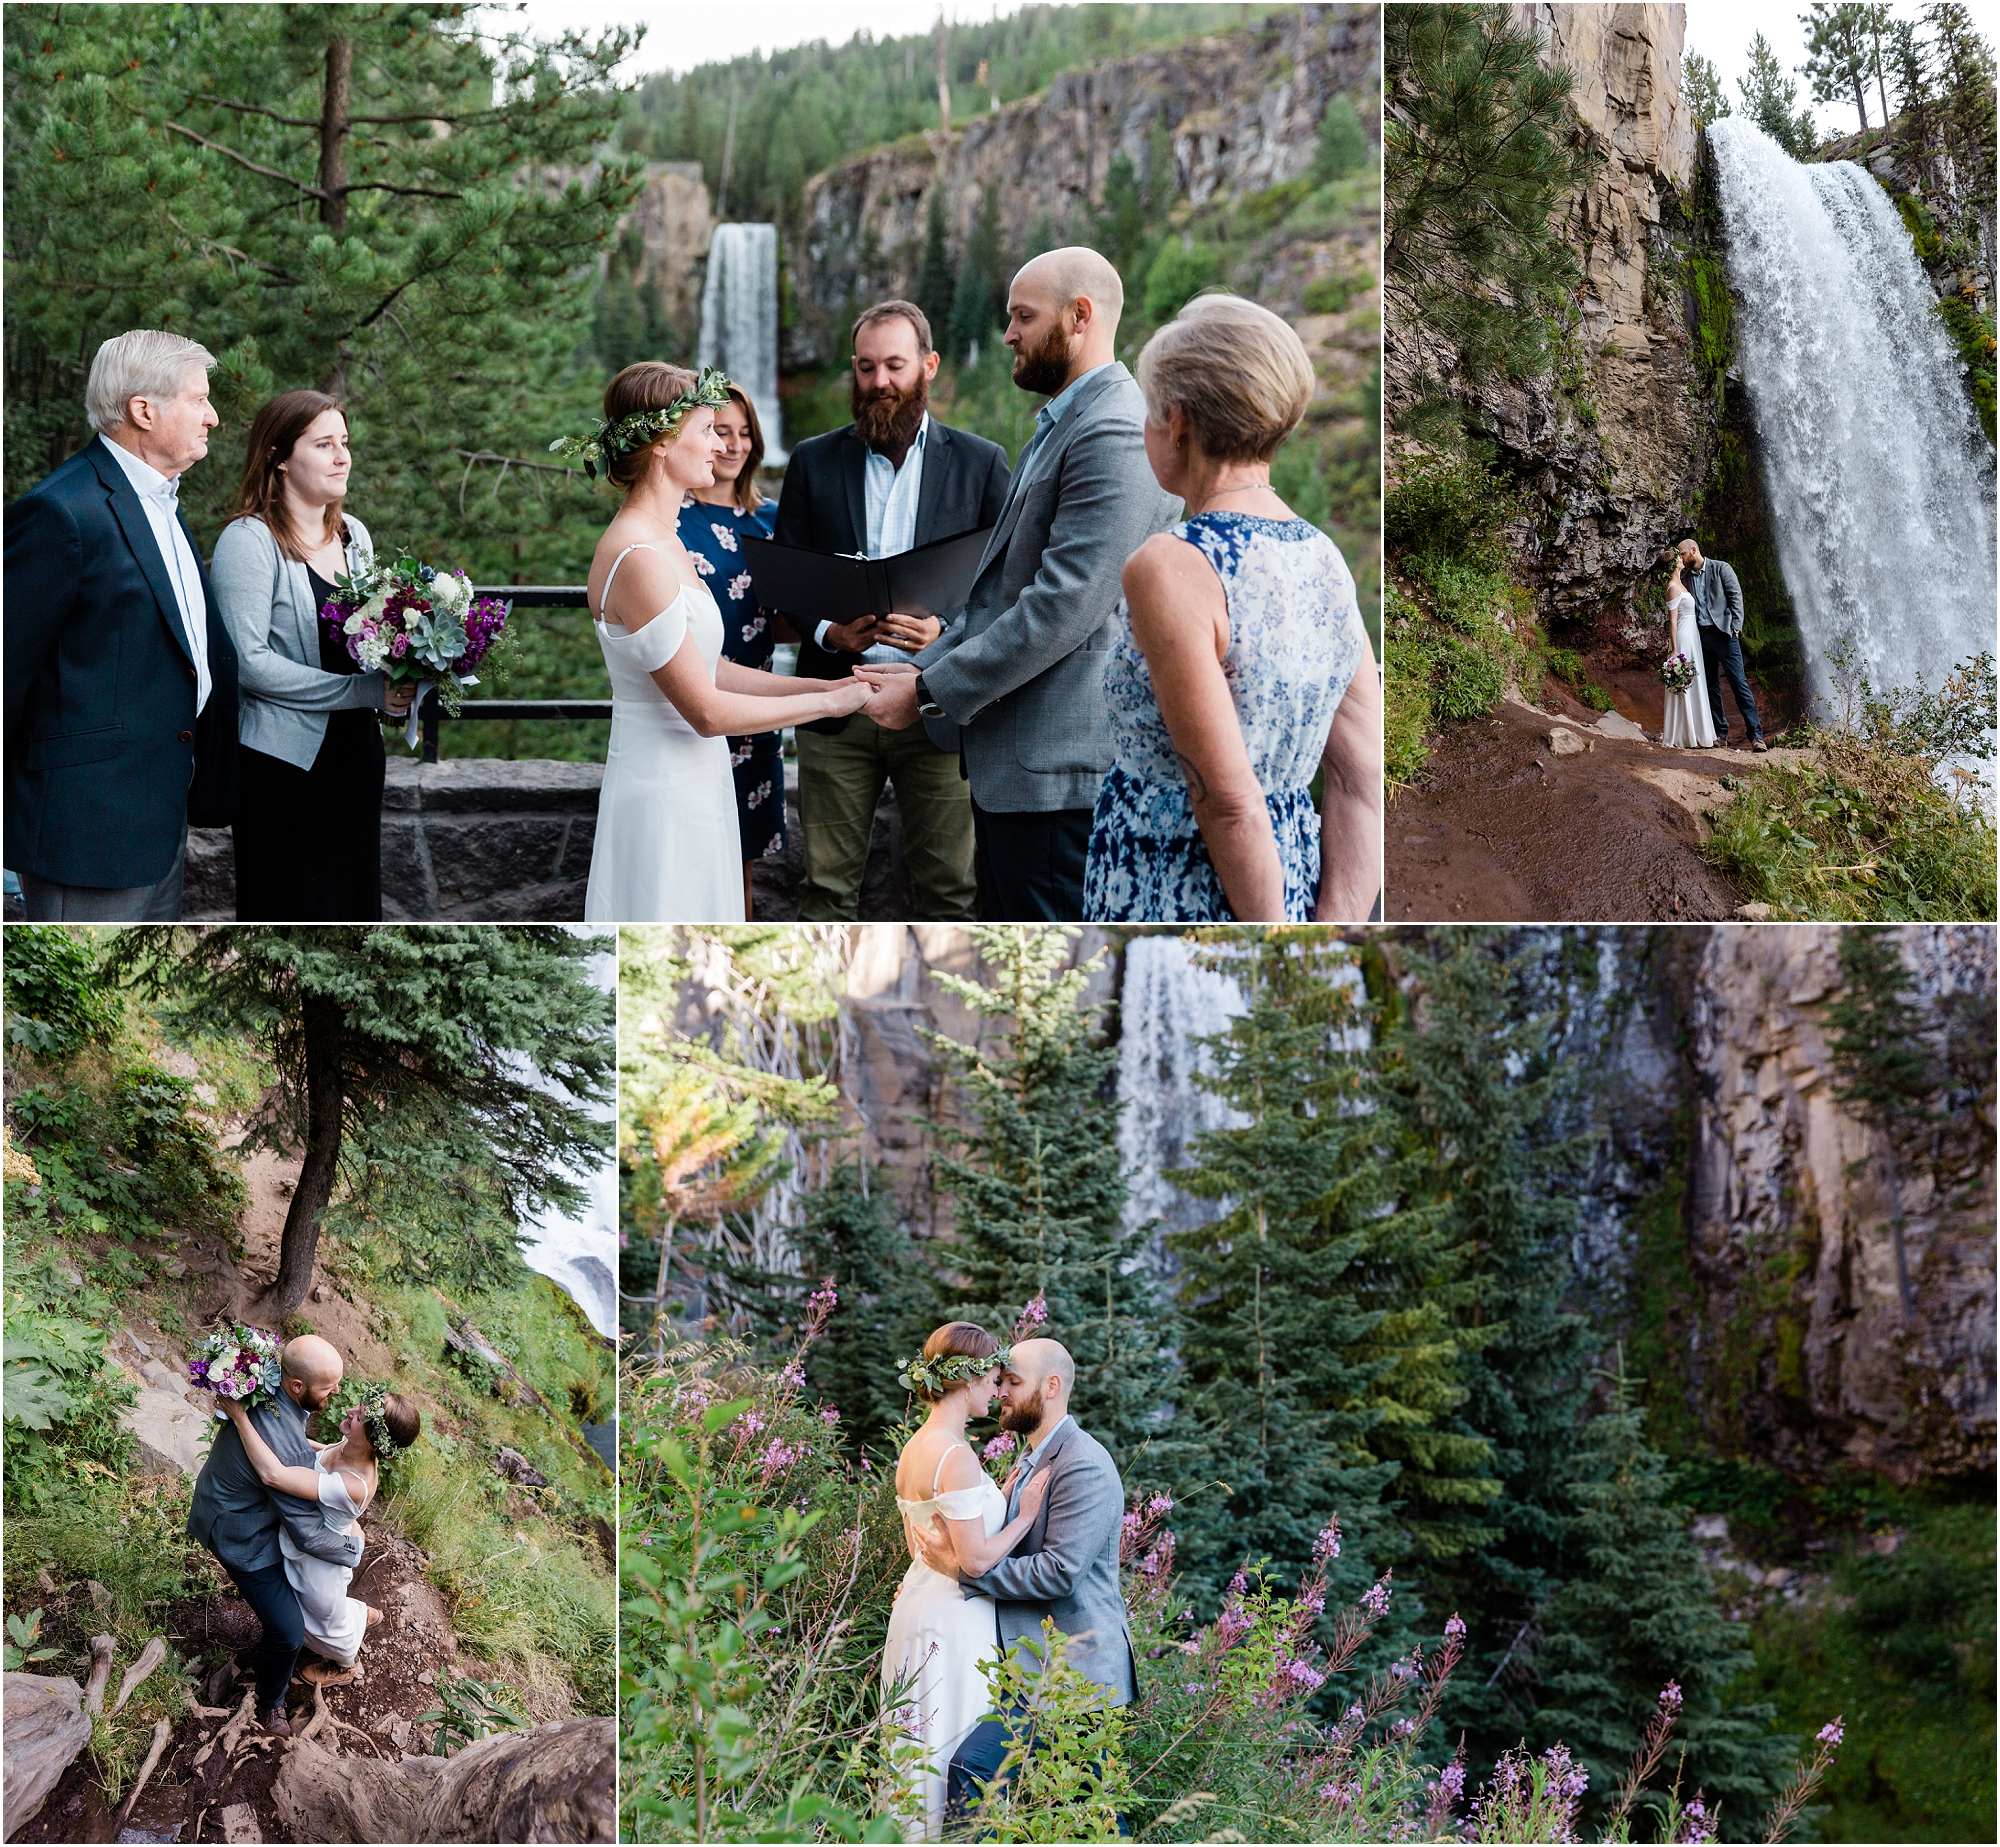 A waterfall ceremony in front of Tumalo Falls is the perfect backdrop to elope in Bend Oregon. | Erica Swantek Photography